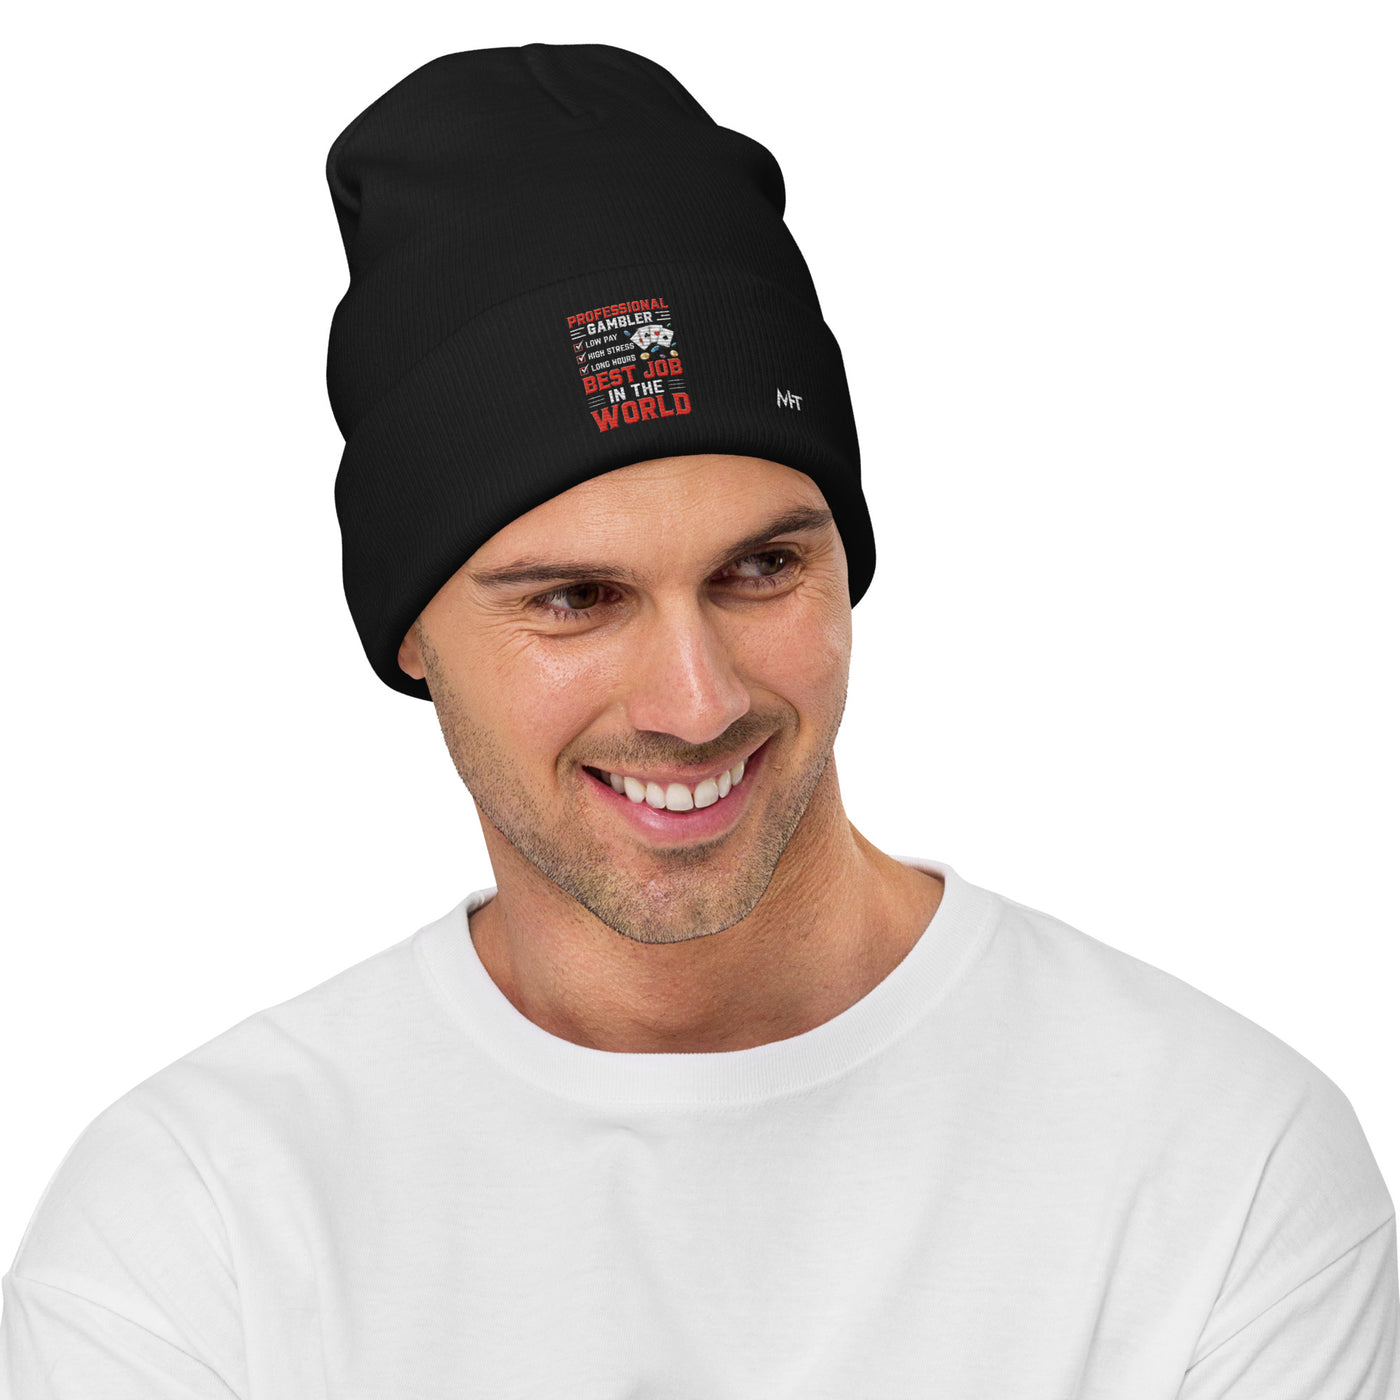 Professional Gambler: The Best Job in the World - Embroidered Beanie